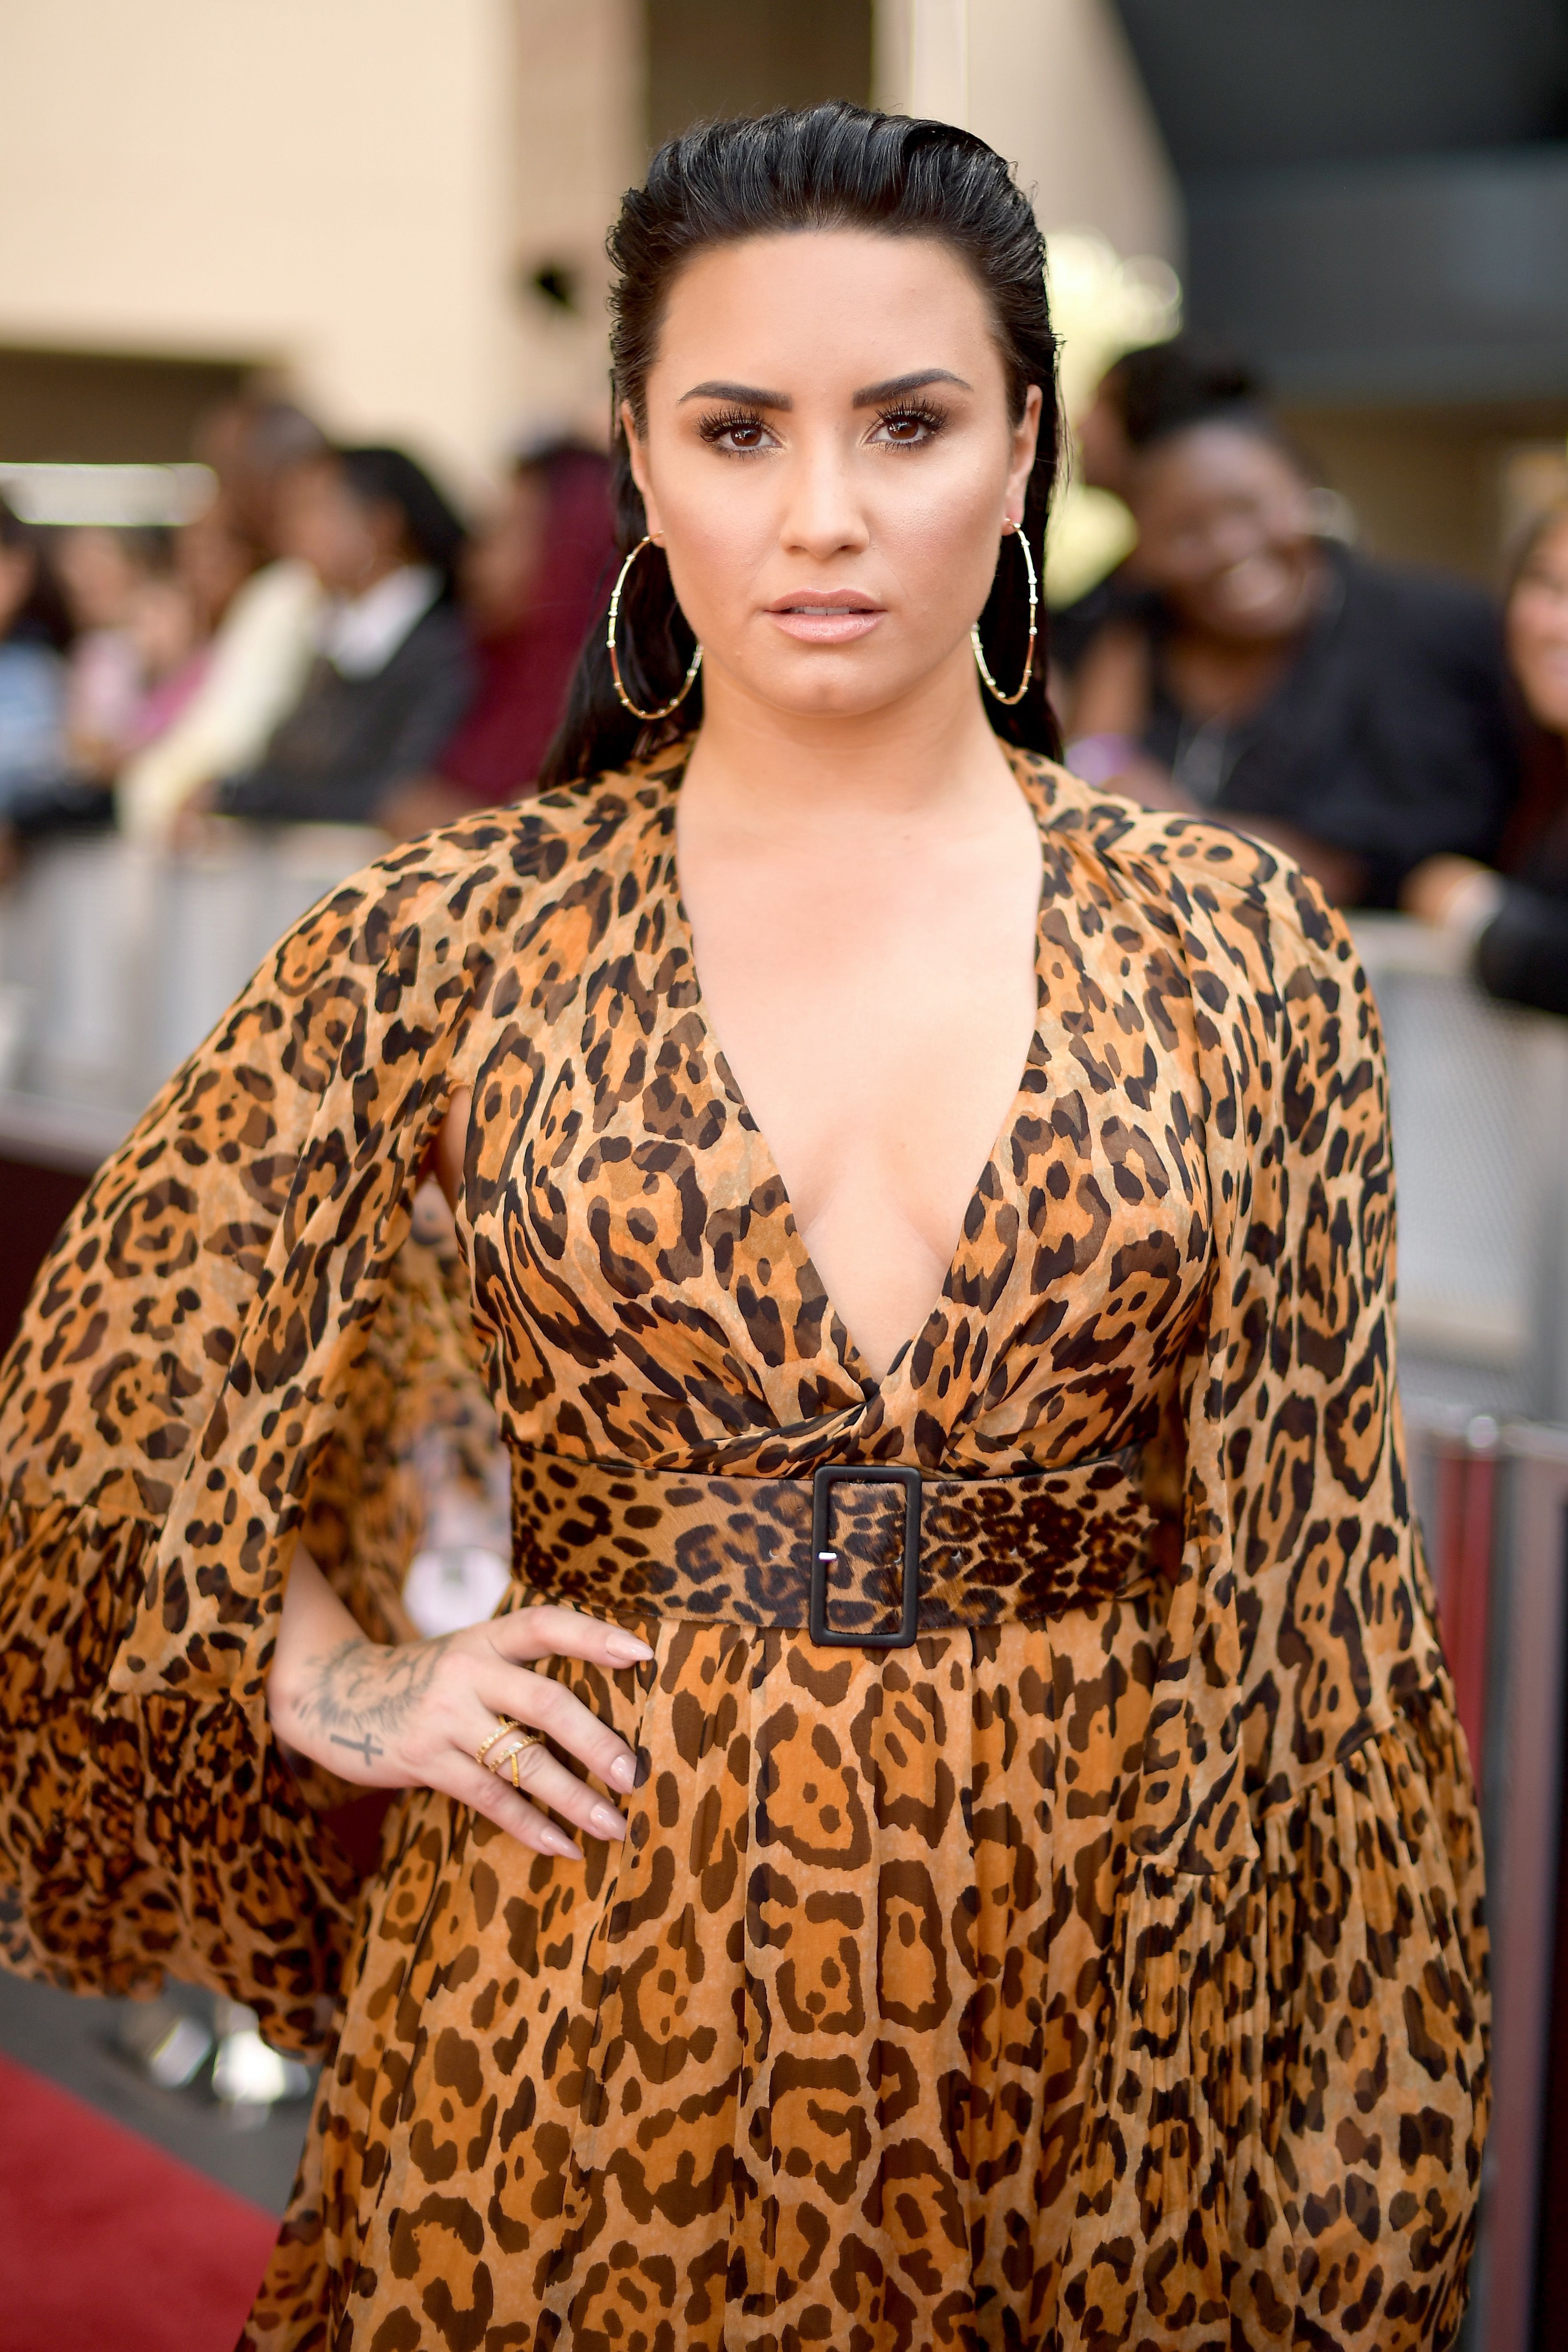 Demi Lovato at the Billboard Music Awards on May 20, 2018, in Las Vegas | Getty Images